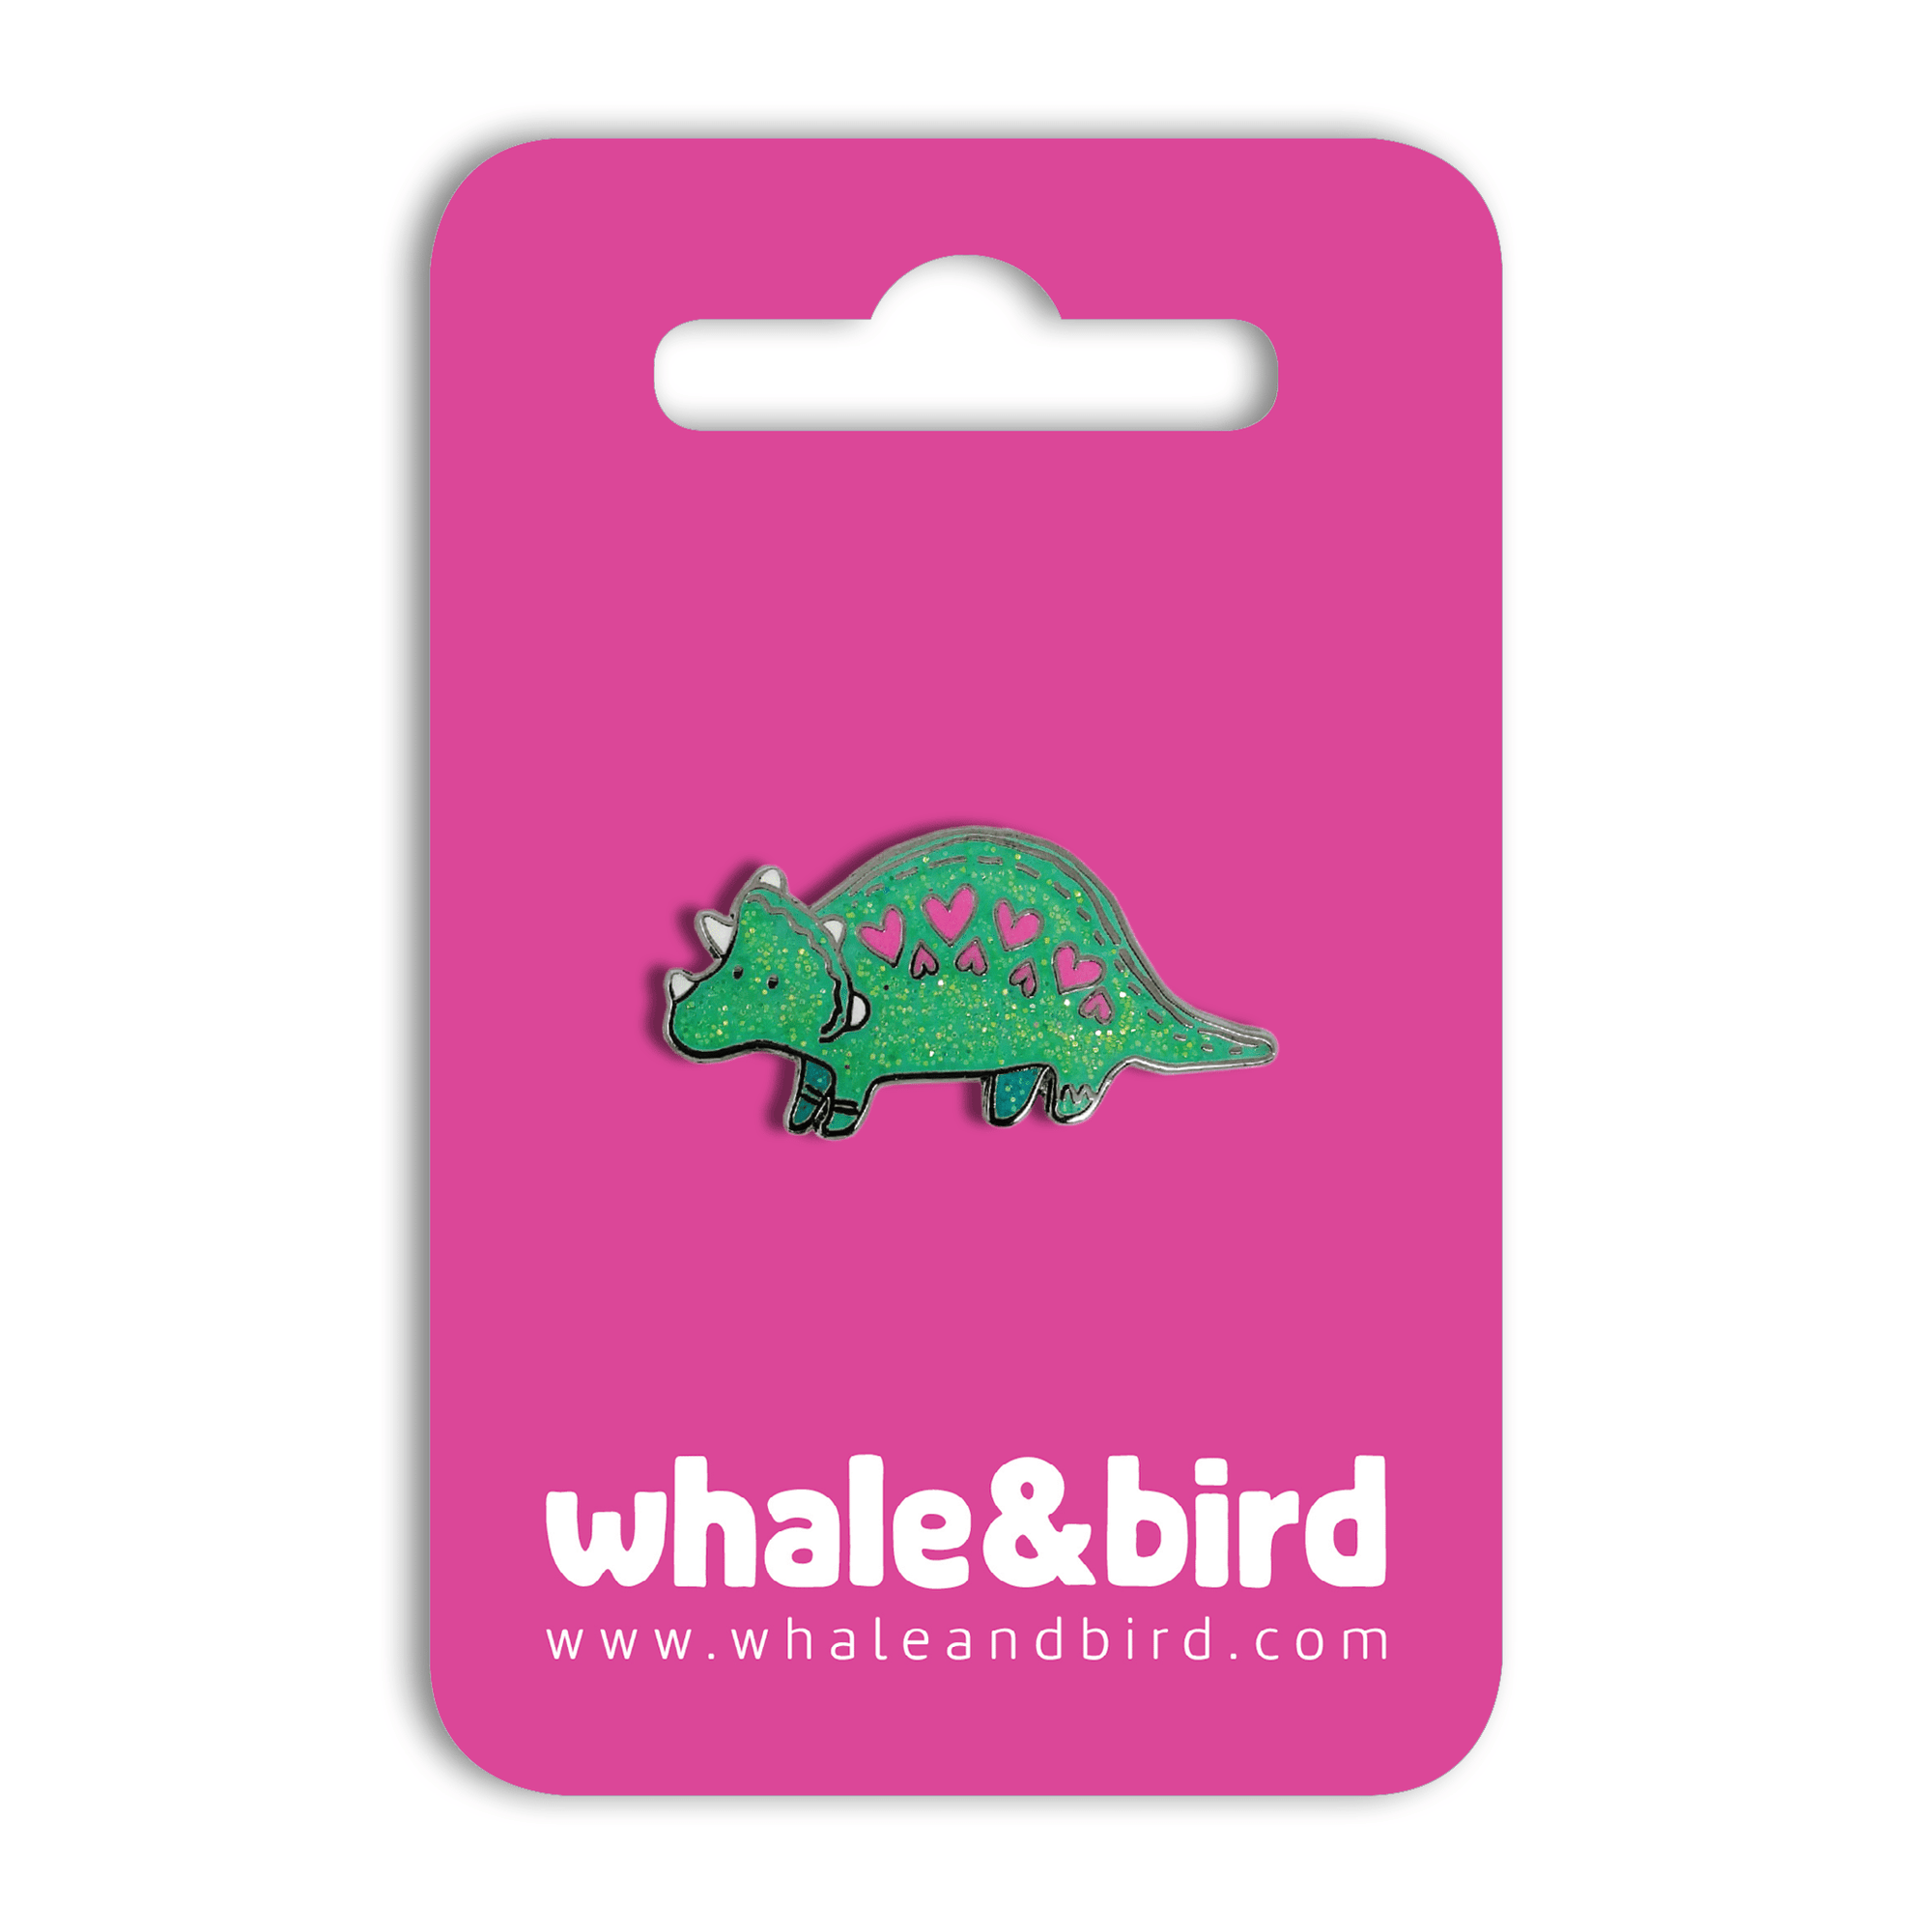 Triceratops Hard Enamel Pin - Extra Glittery! by Anna Alekseeva - Whale and Bird